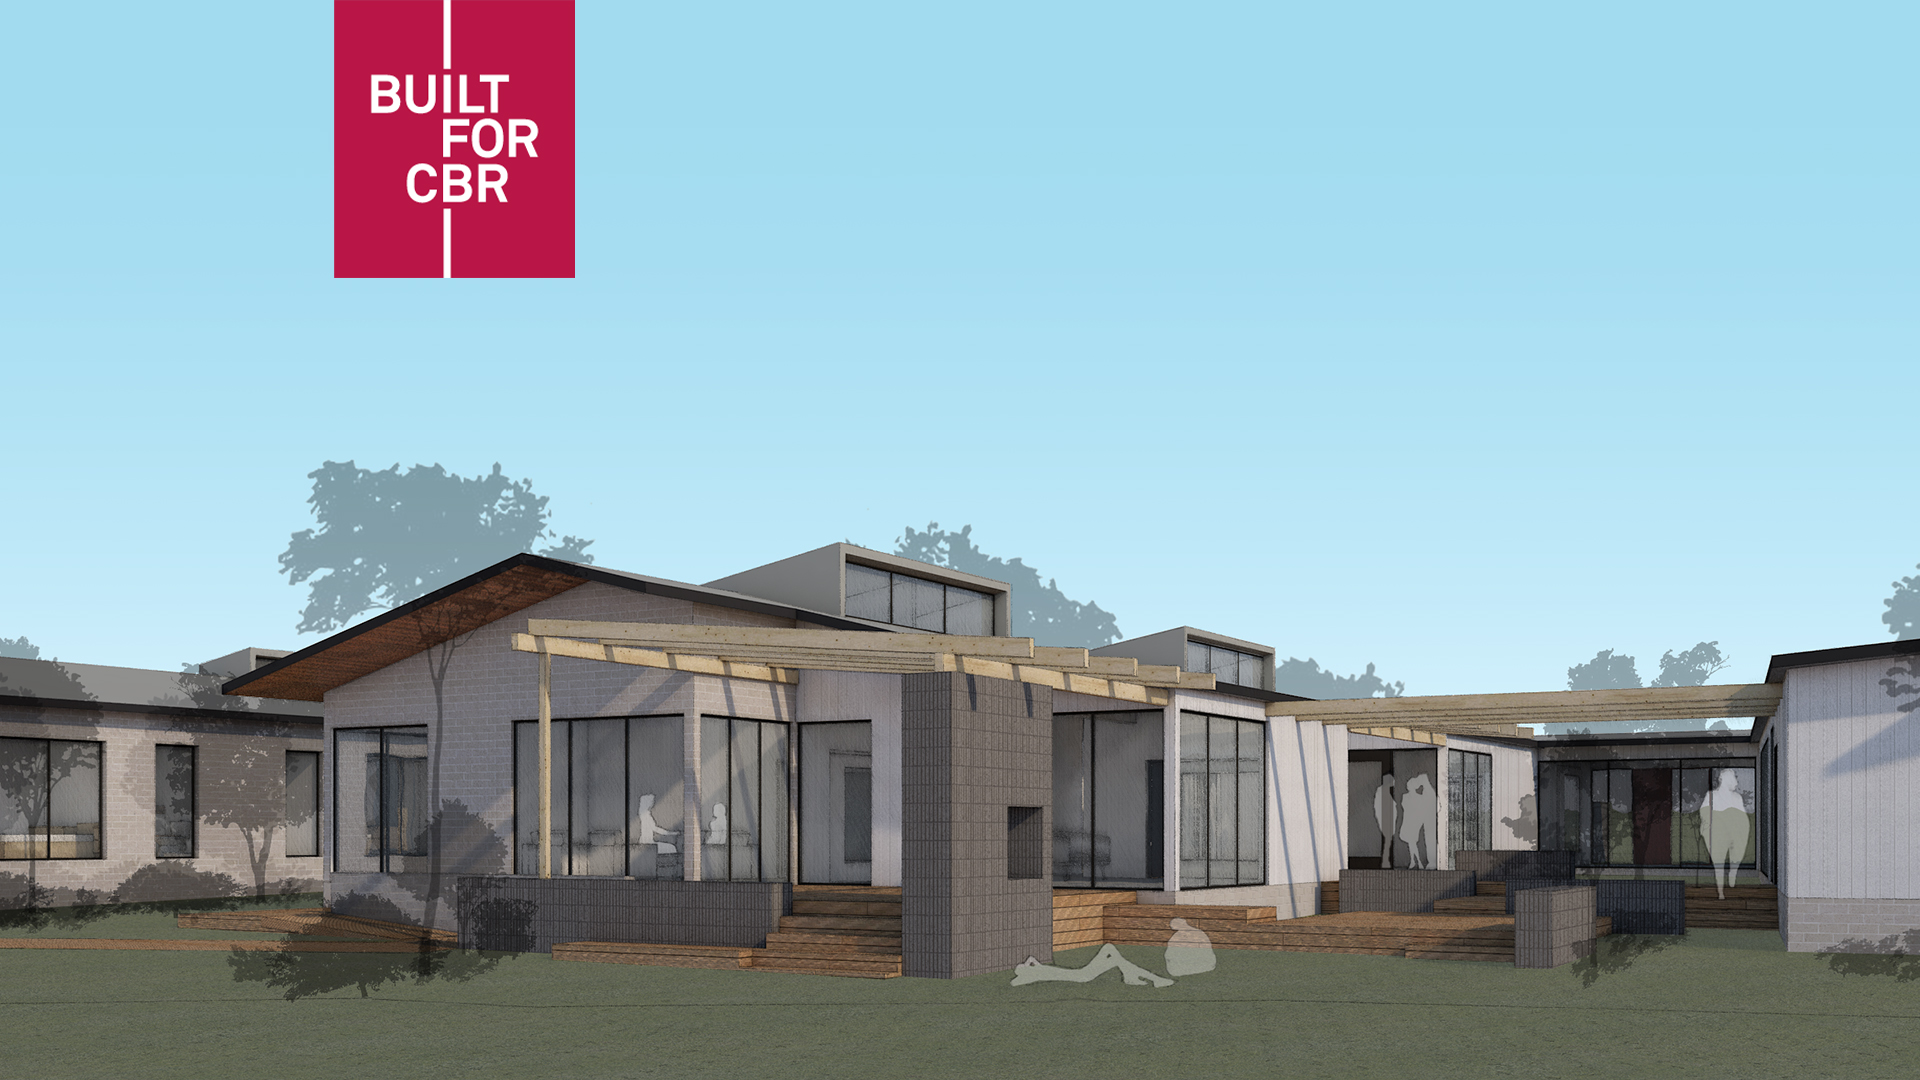 An artist's impression of the exterior of the new eating disorder facility.